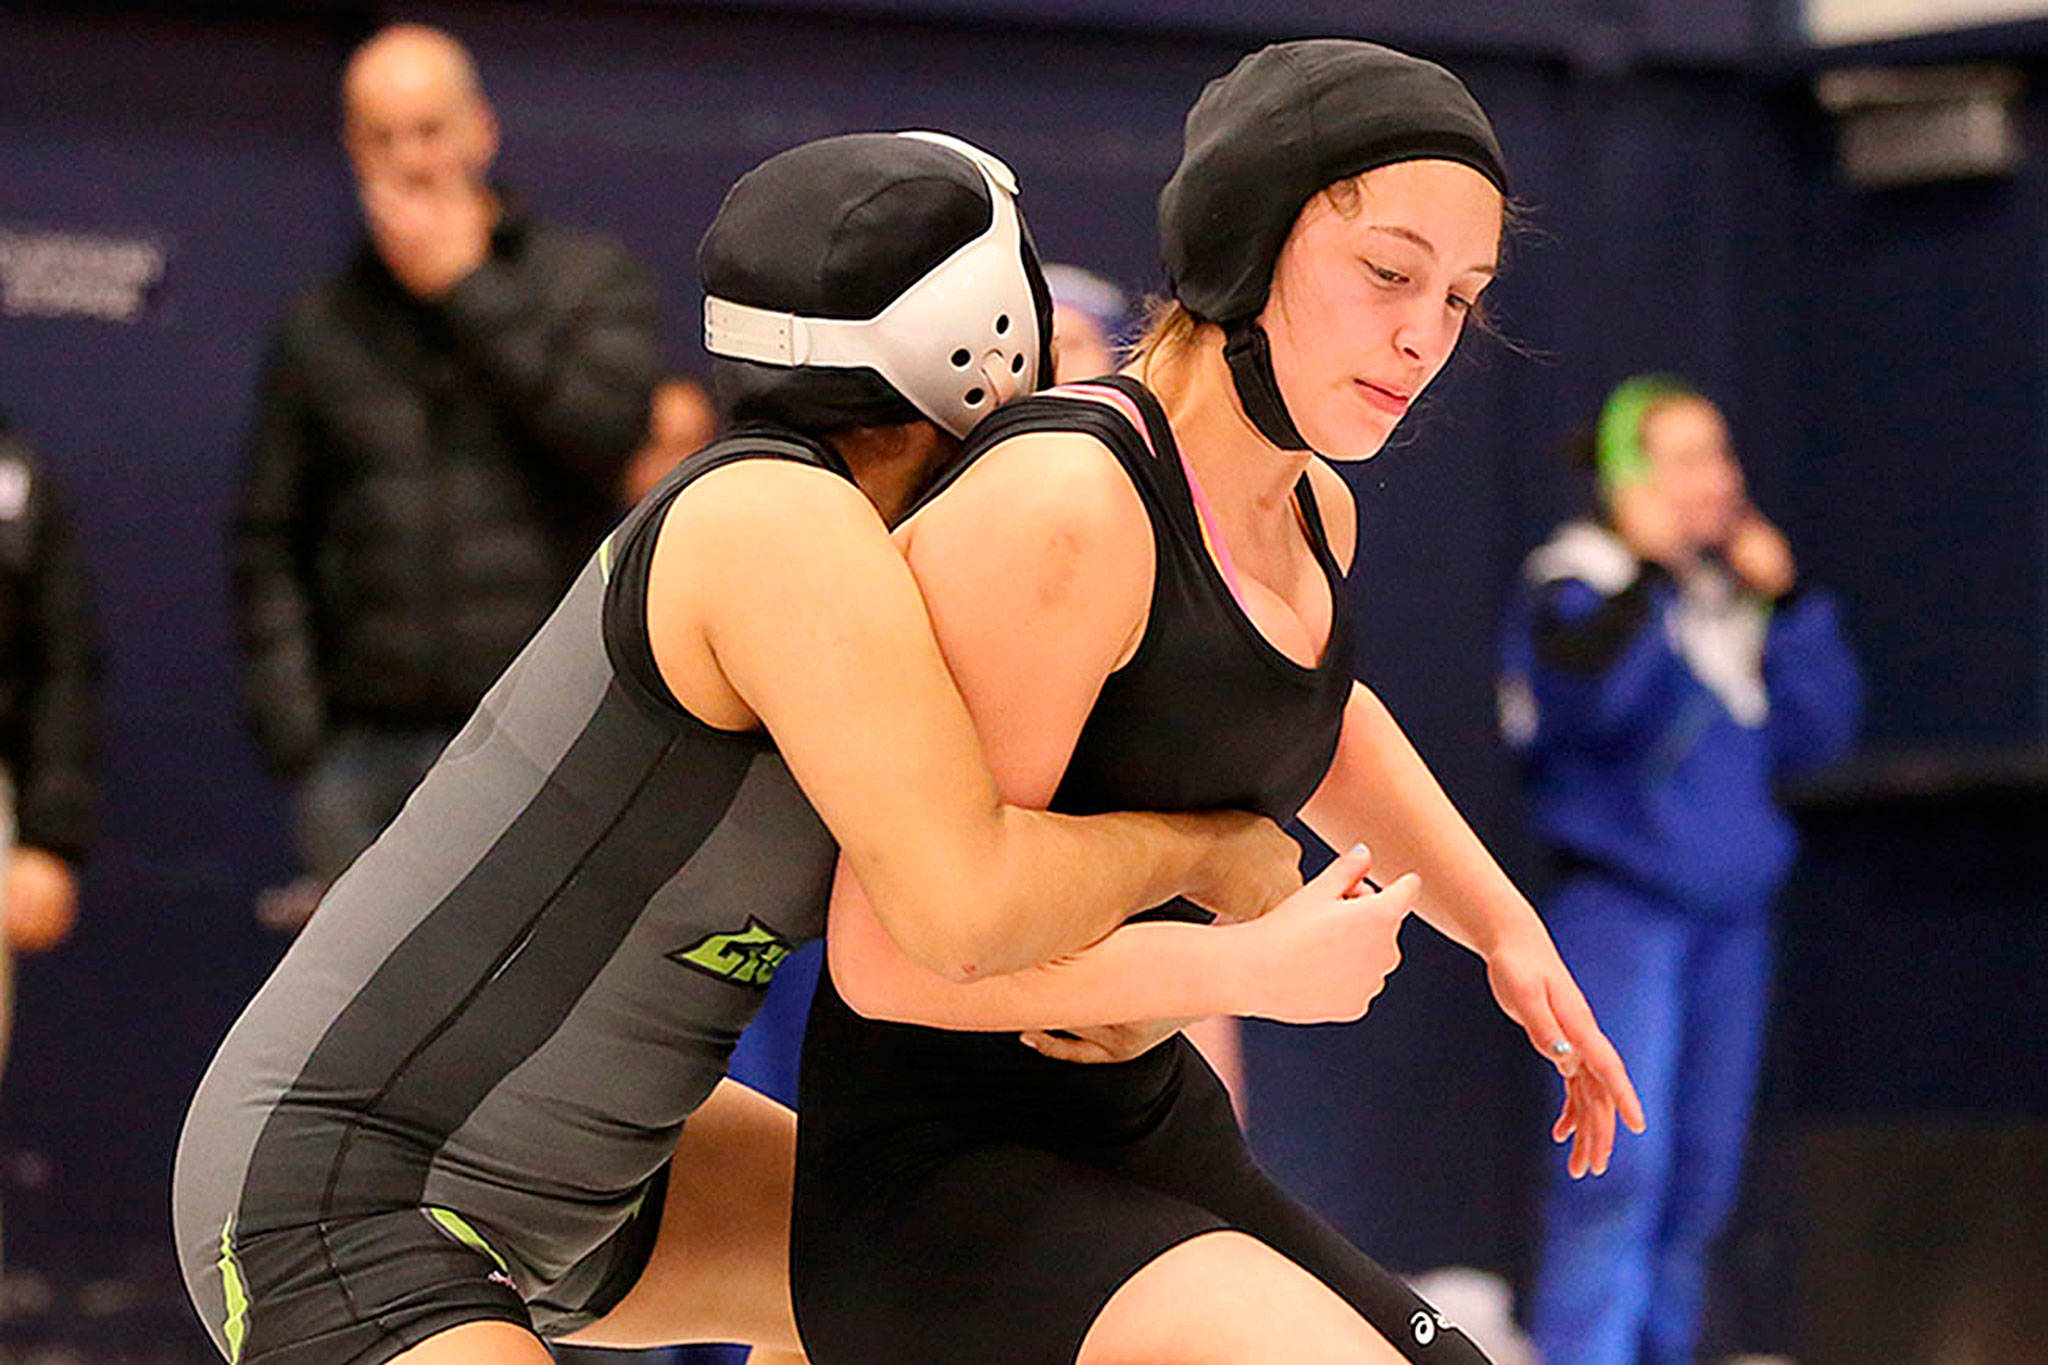 South Whidbey’s Nicole Helseth, right, wrestles in the Kamiak tournament last year. This weekend she and the other Falcon wrestlers will compete in the sub-regional meets. (Photo by John Fisken)